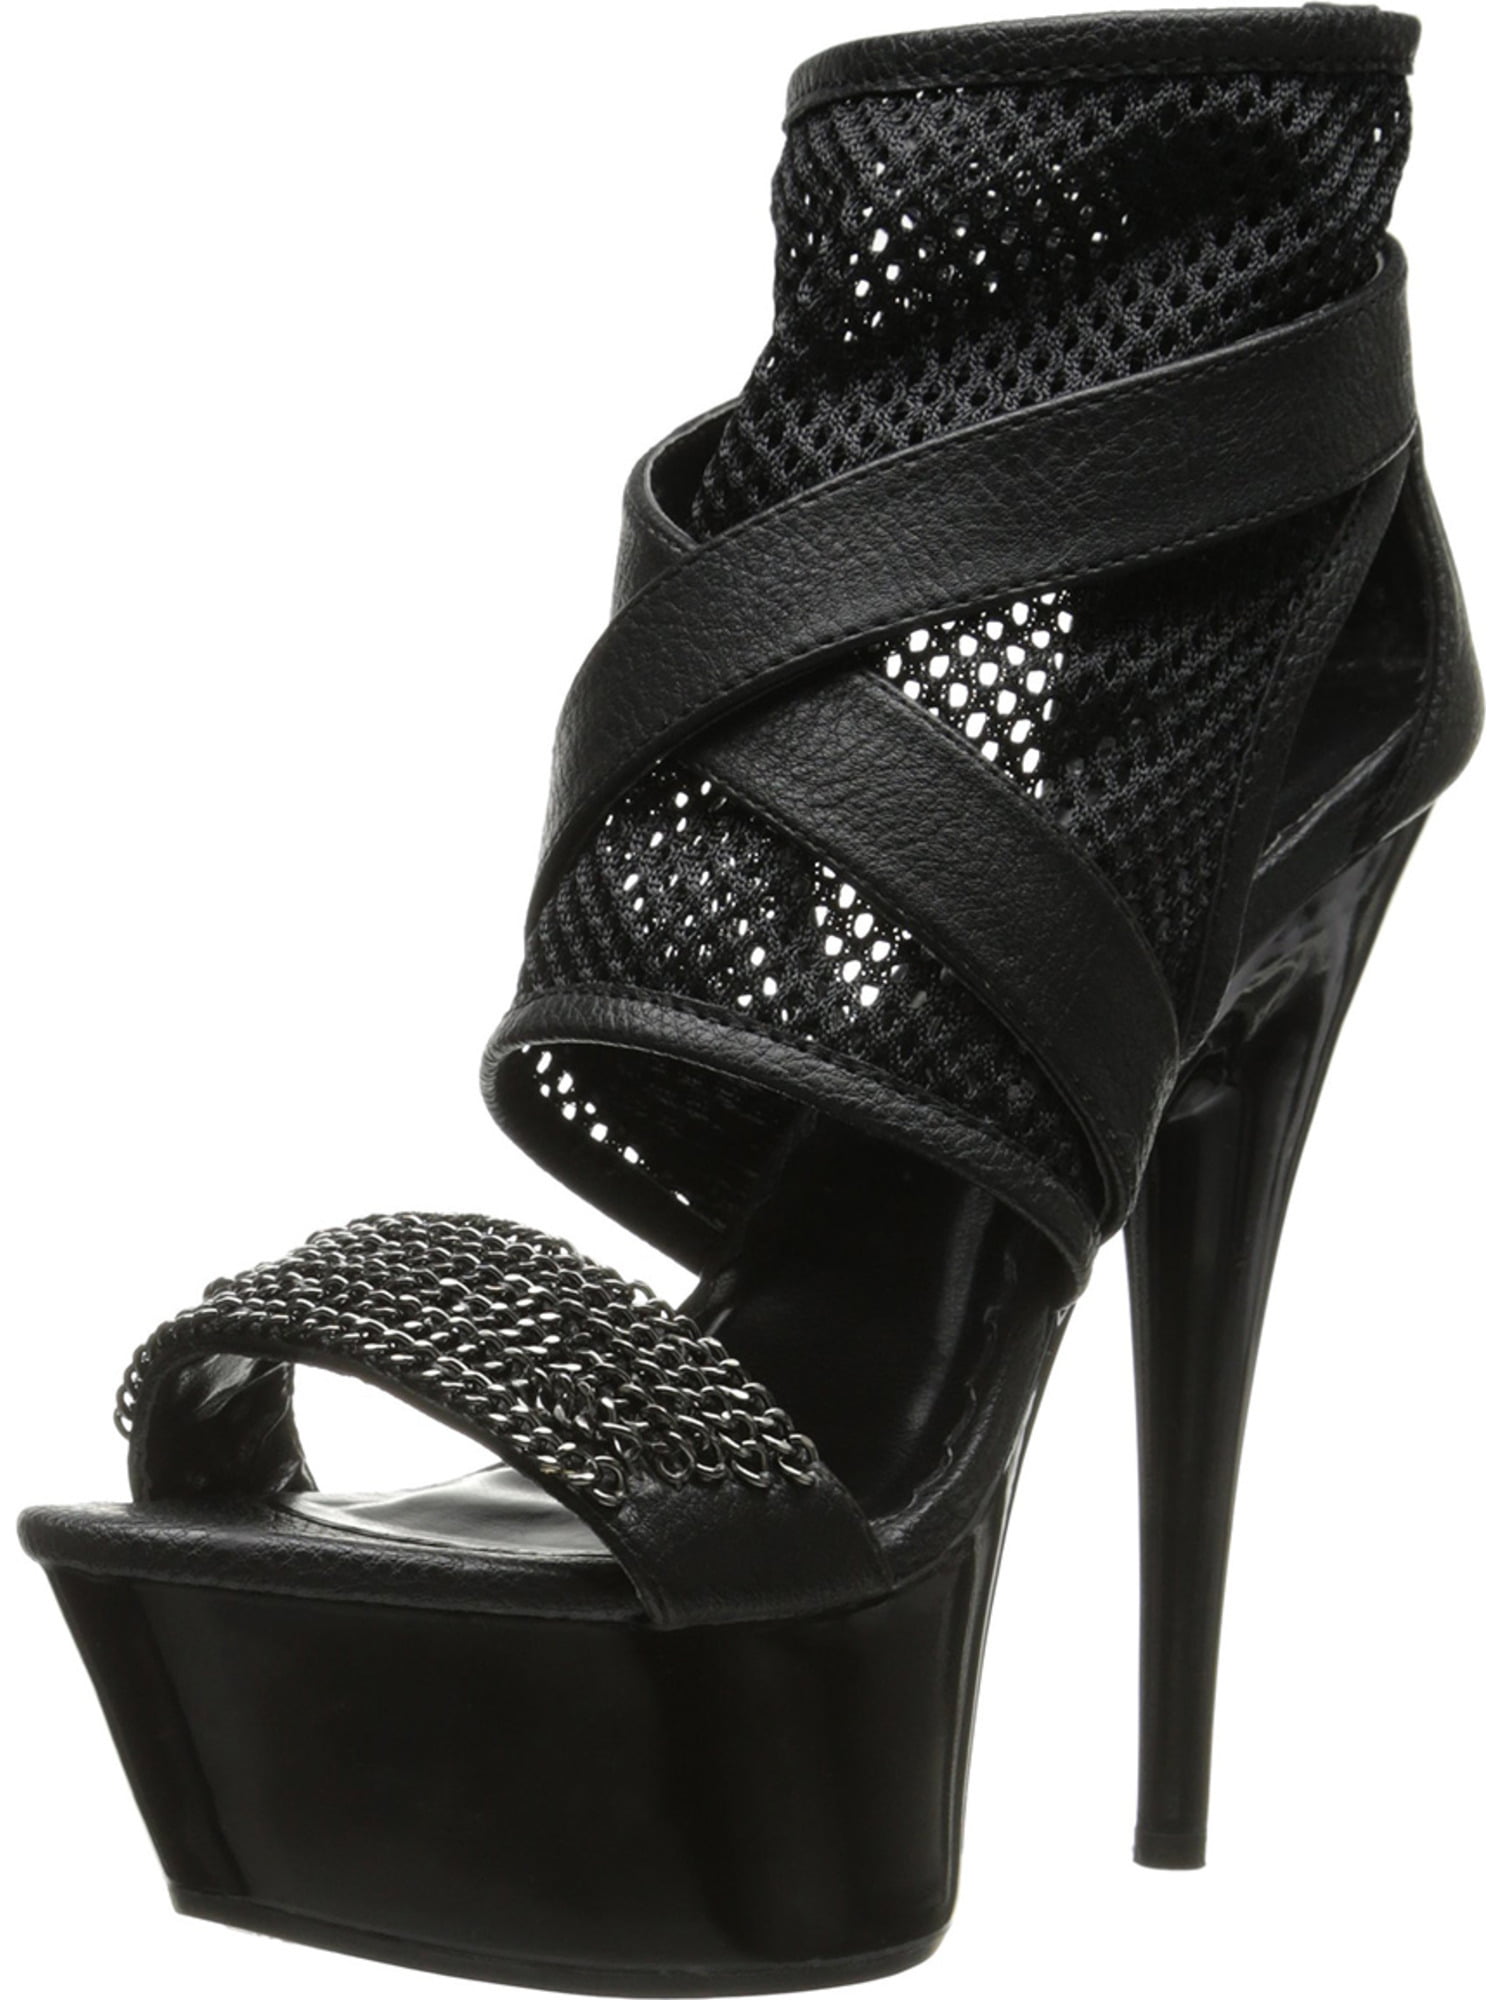 Black Faux Leather Sandals with Fishnet 